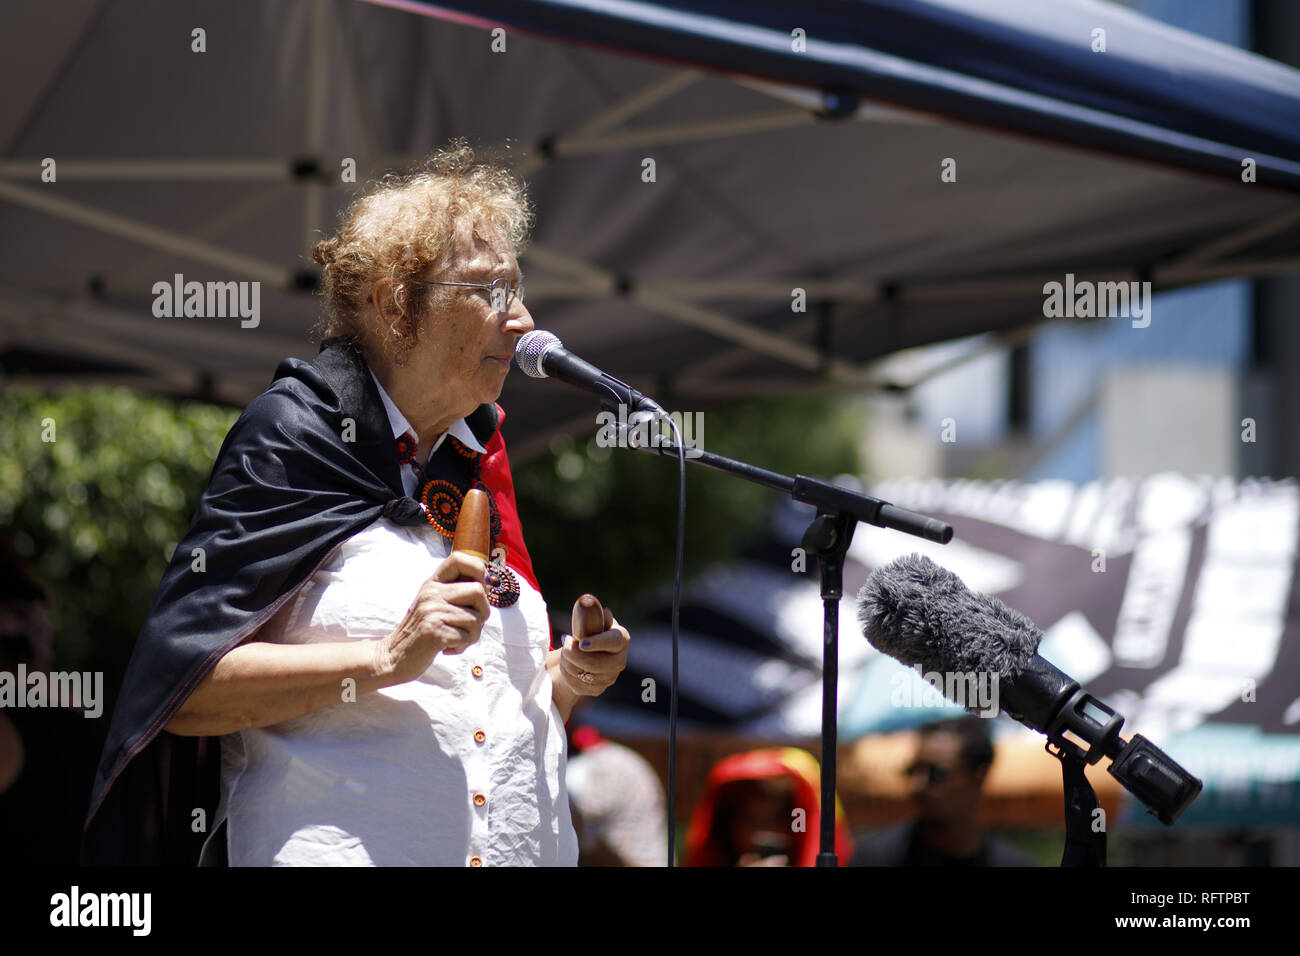 Brisbane, Queensland, Australia. 26th Jan, 2019. Indigenous activist Glenys Croft was born at the Keppell Islands on the central coast of Queensland, and states that she has been to each rally since they began in the state in the 1970s.On the 26th of January, many Australians celebrate Australia day, but to many indigenous Australian people, it is a day synonymous with decades of systematic abuse and genocide. Several thousand protesters took the streets in Brisbane (known as Meanjin by local indigenous people) to rally for sovereignty rights and date changes. (Credit Image: © Joshua Prie Stock Photo